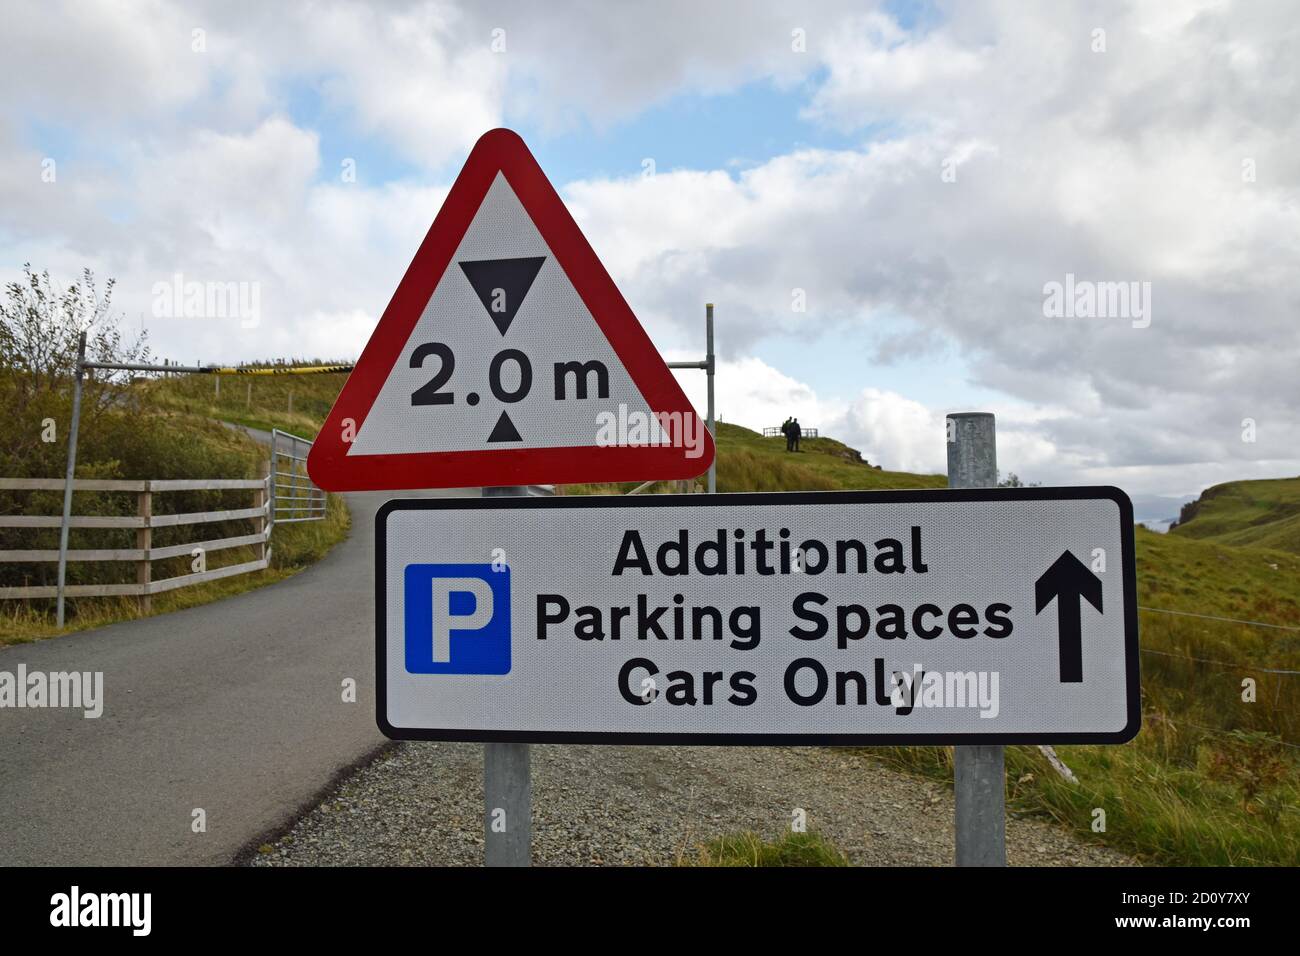 Two metre height restriction with blurred barrier in background. Sign for additional parking spaces cars only with arrow and parking icon. UK. Stock Photo